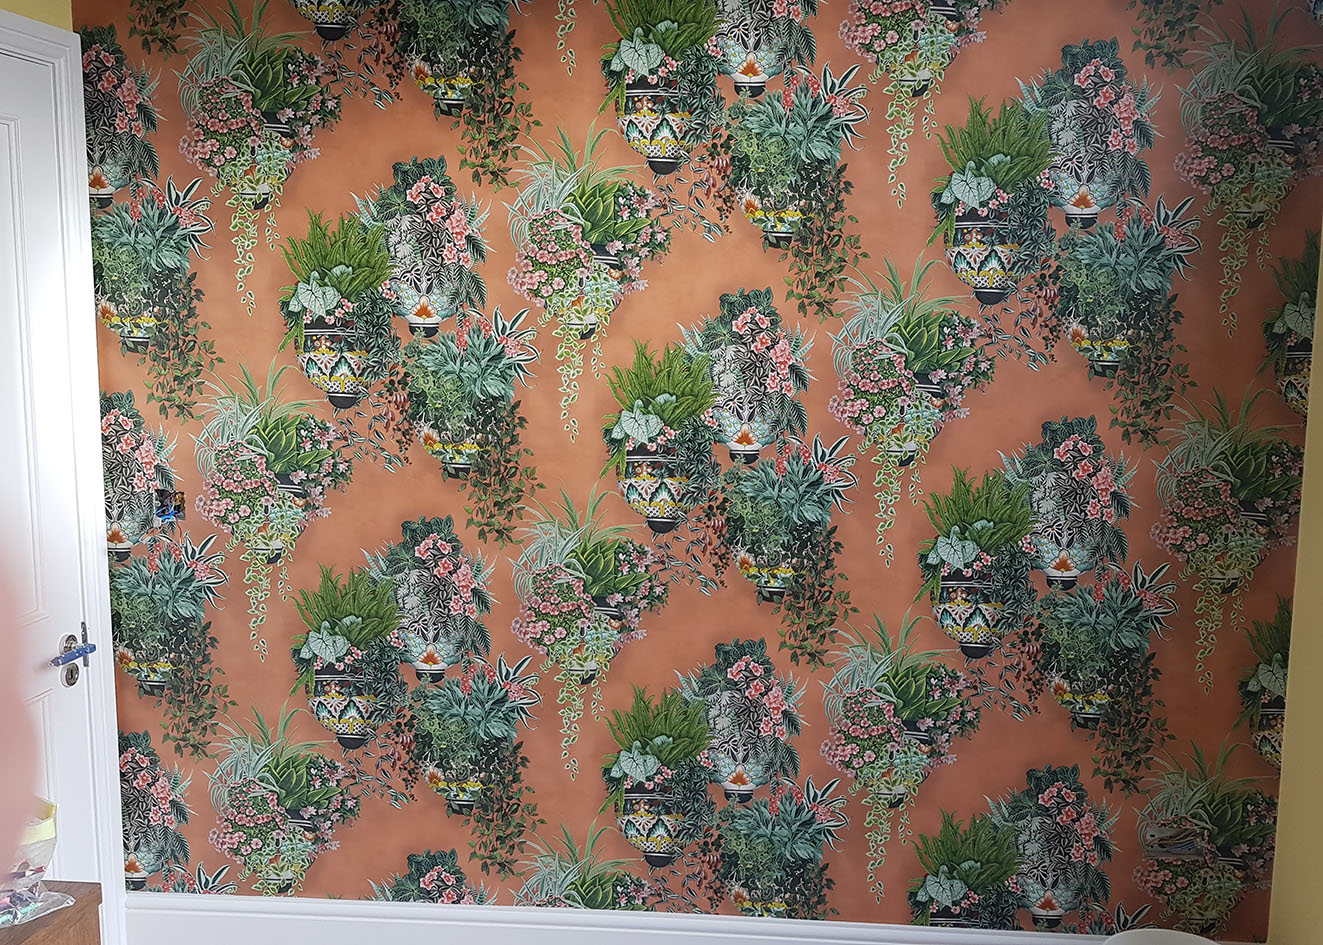 Feature wall wallpaper hanging. Colourful pattern.